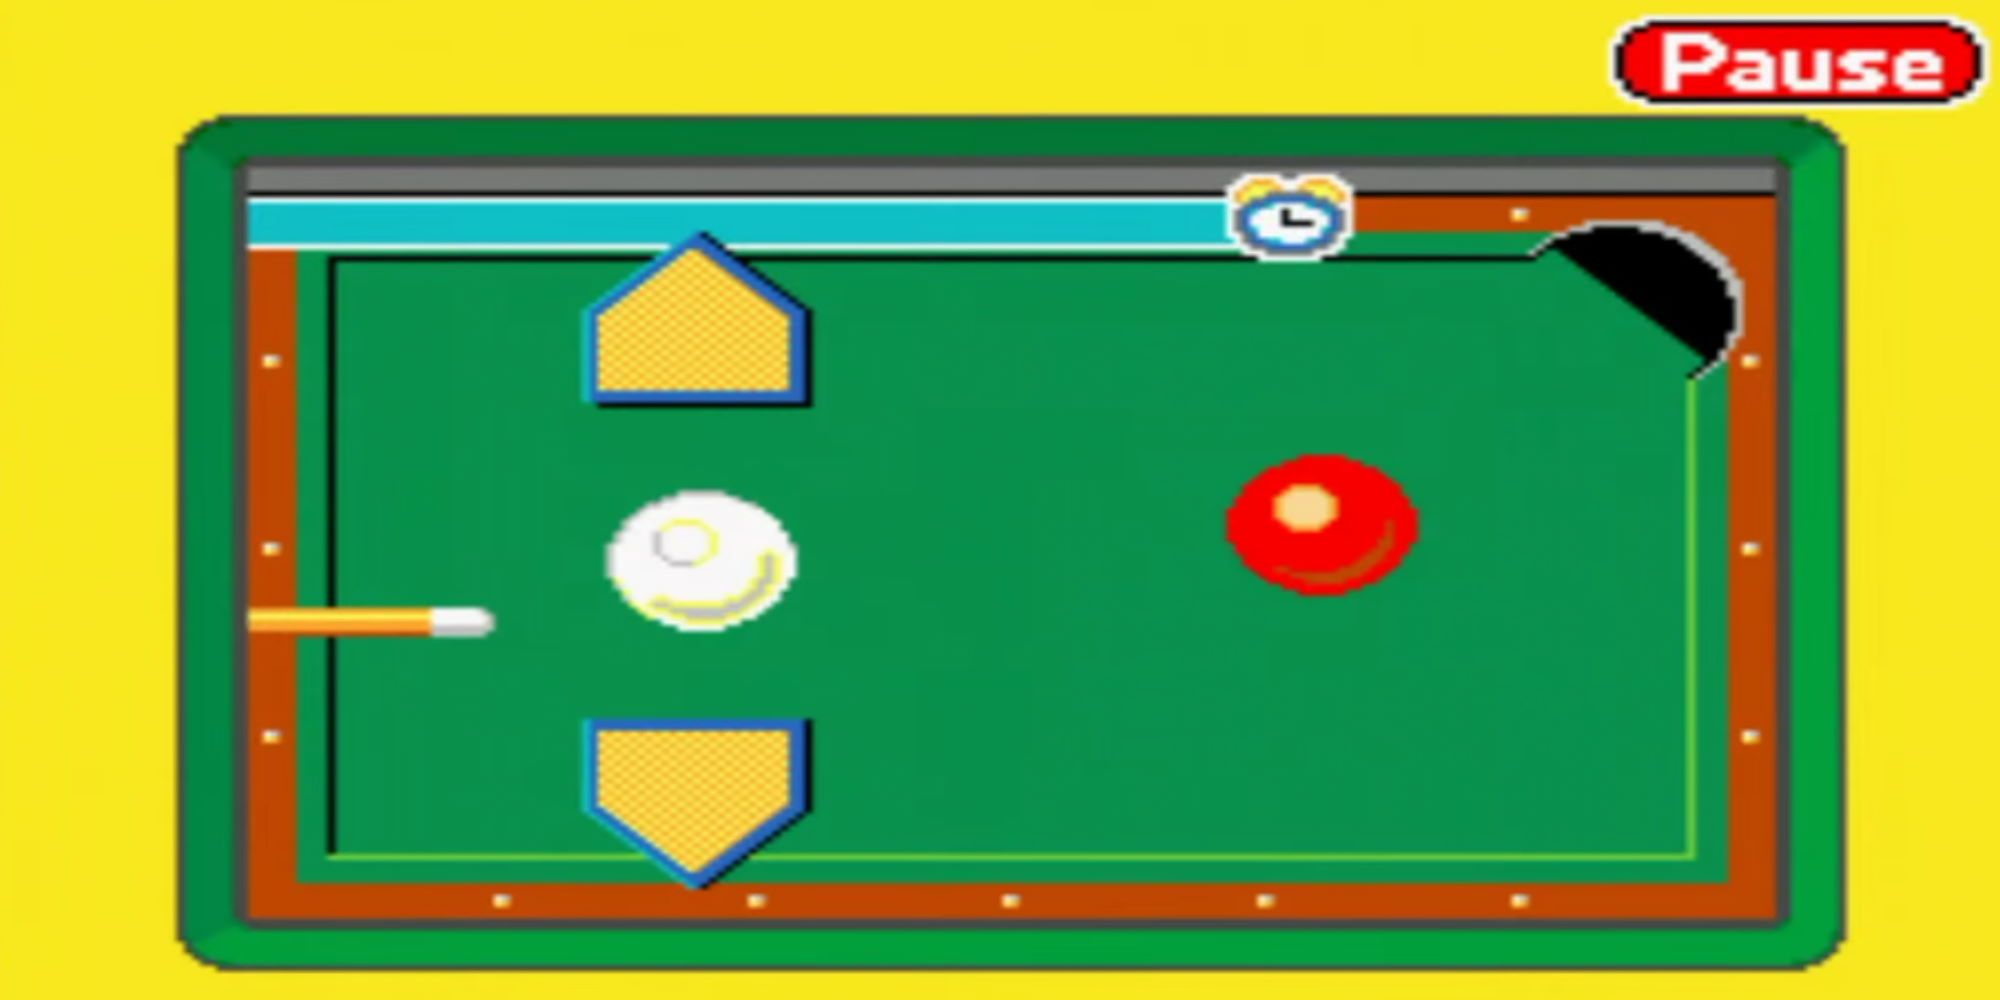 A pool cue, a cue ball, and a red ball. Arrows, a corner pocket, and 'PAUSE' is on-screen